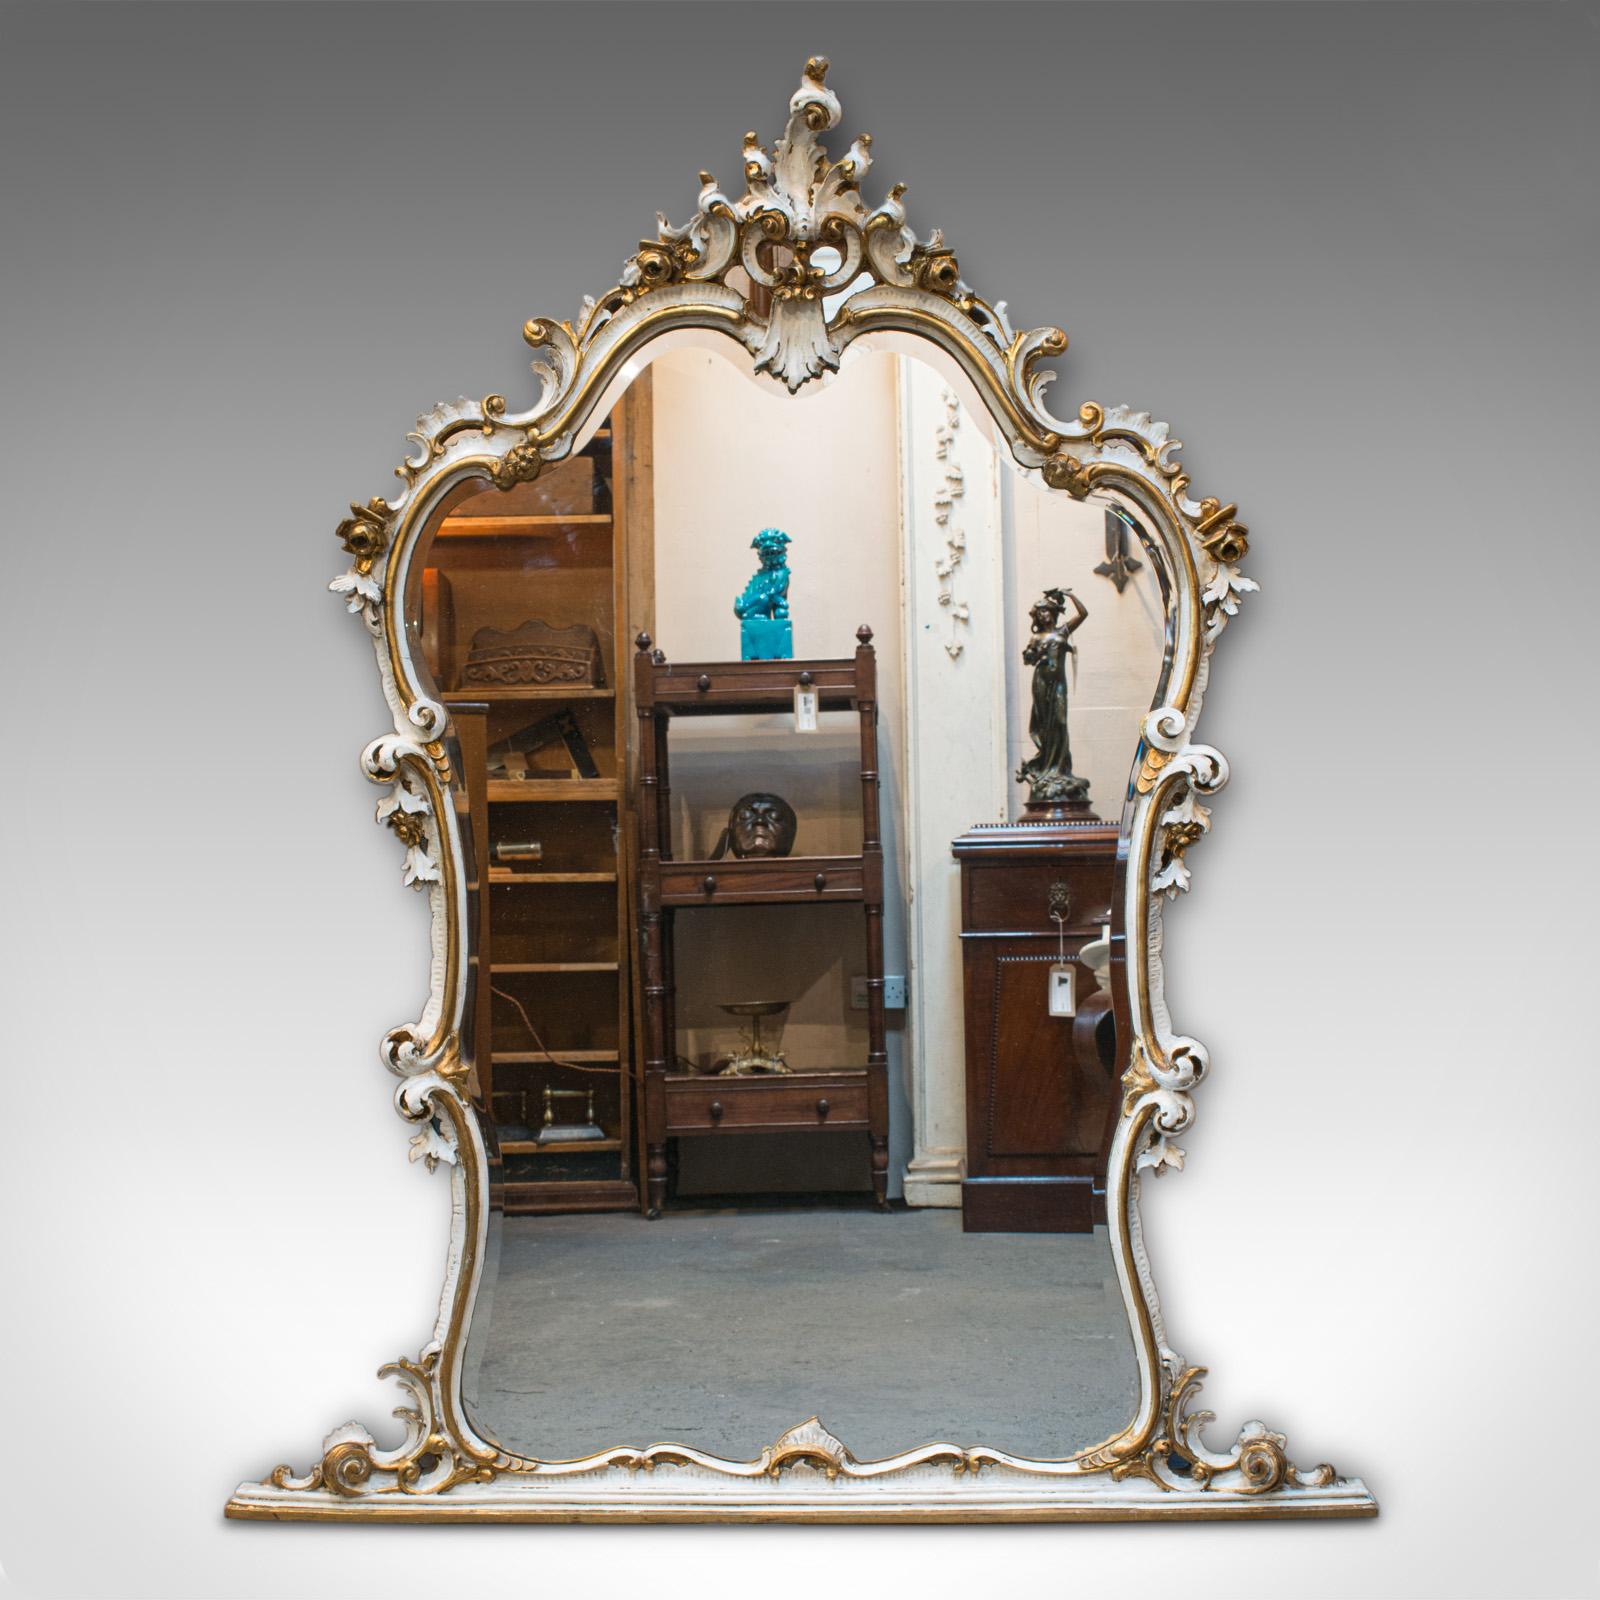 This is a large antique overmantel mirror. A French, gilt gesso and glass mirror with classical Italianate taste, dating to the late 19th century, circa 1900.

Impressive proportions to this grand mirror
Displays a desirable aged patina
Gilt